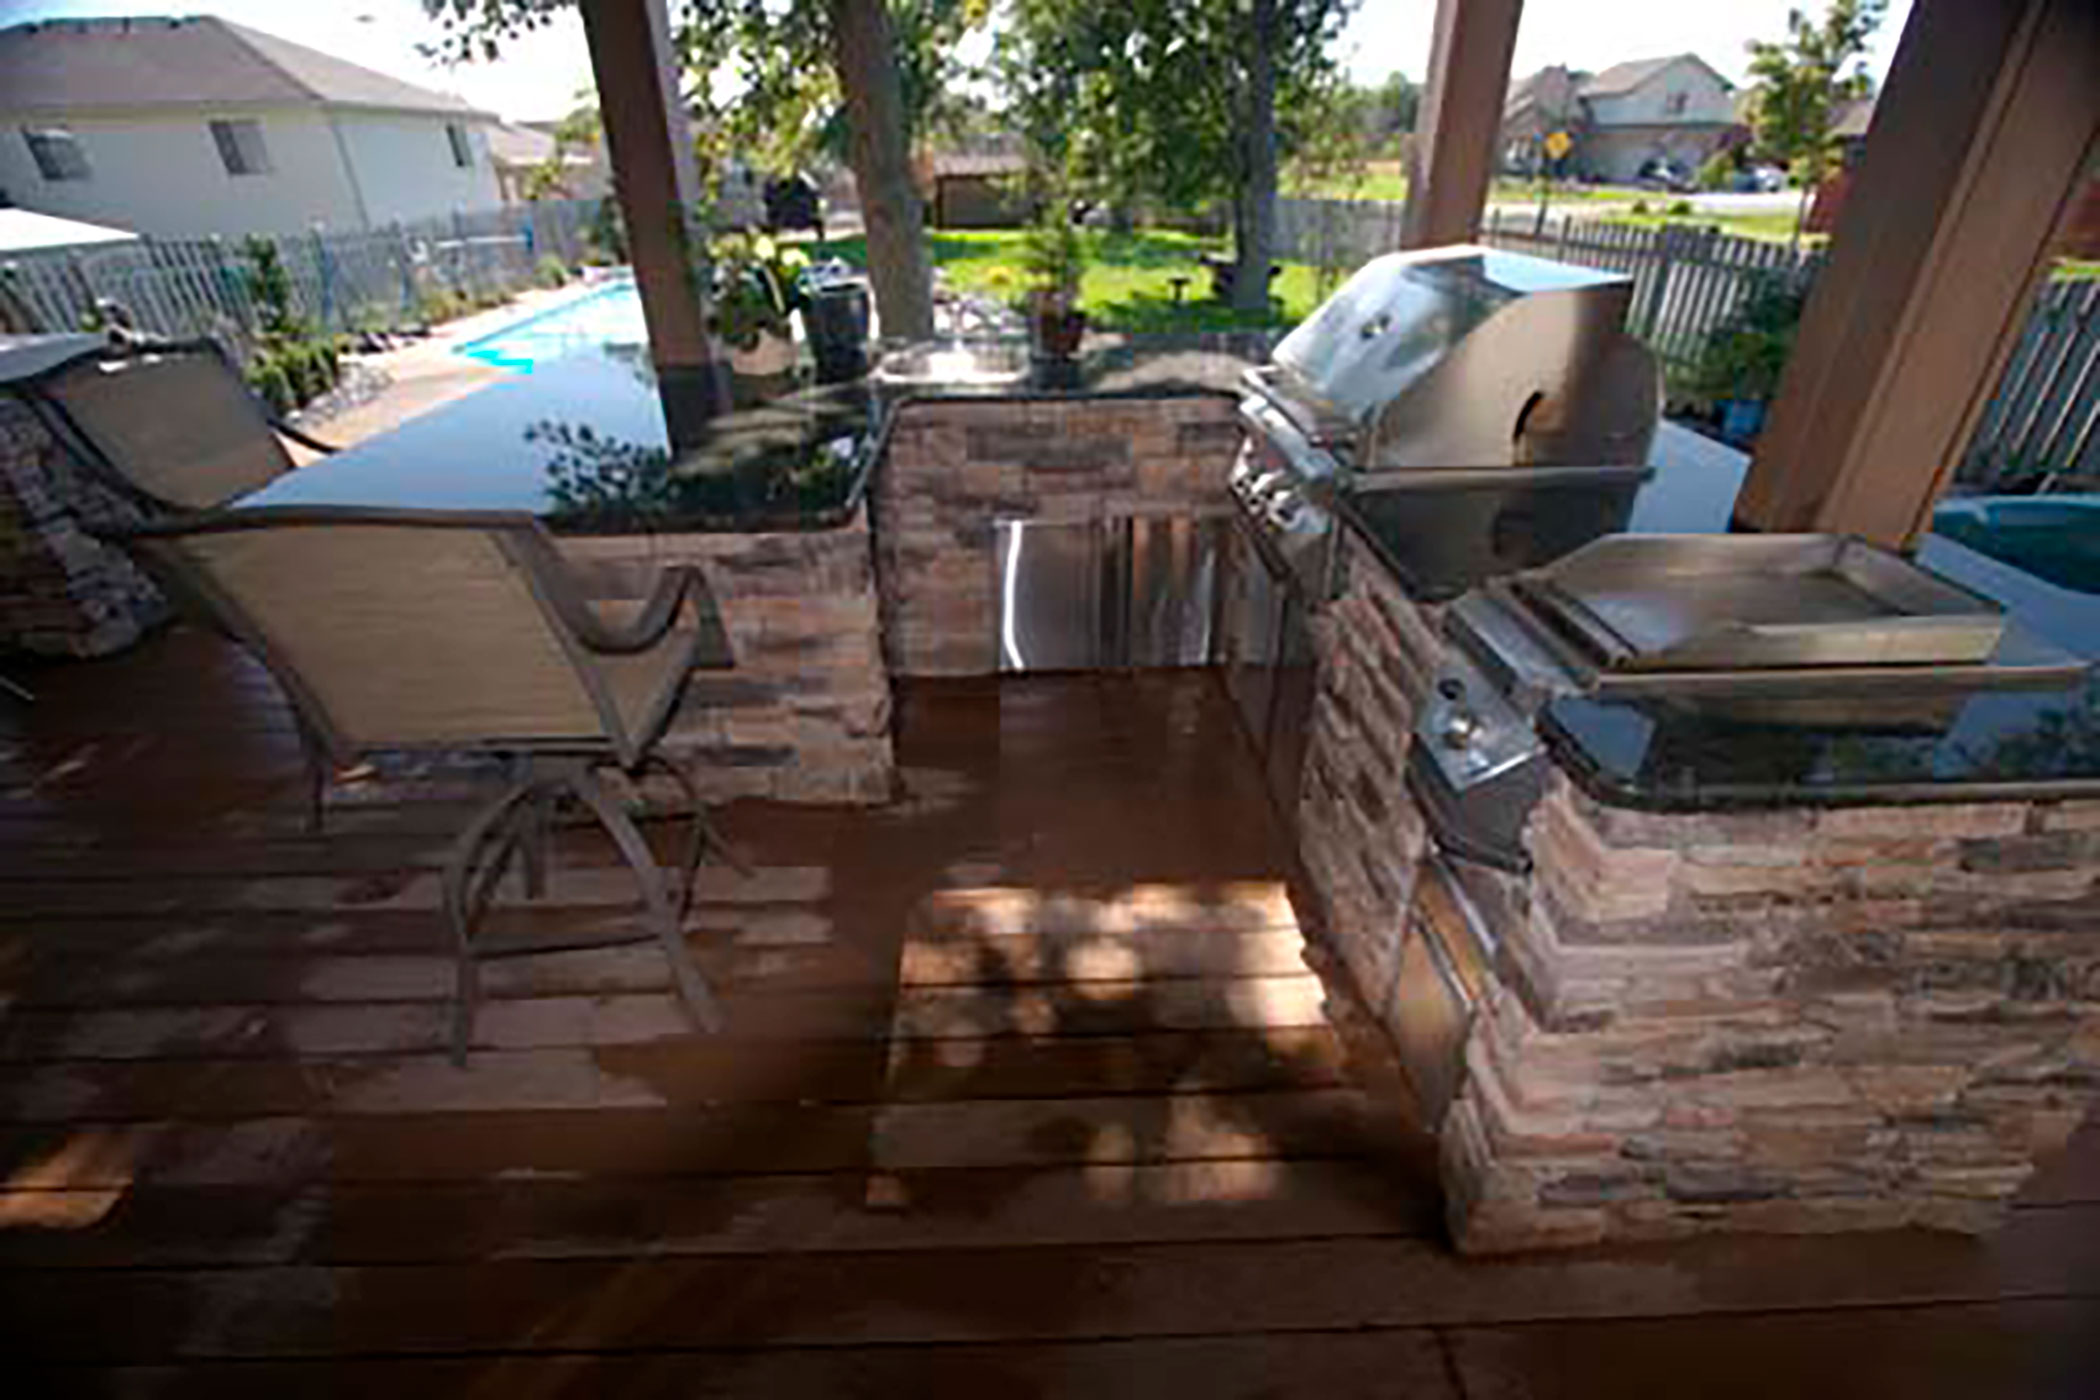 Outdoor Kitchens and Fireplaces